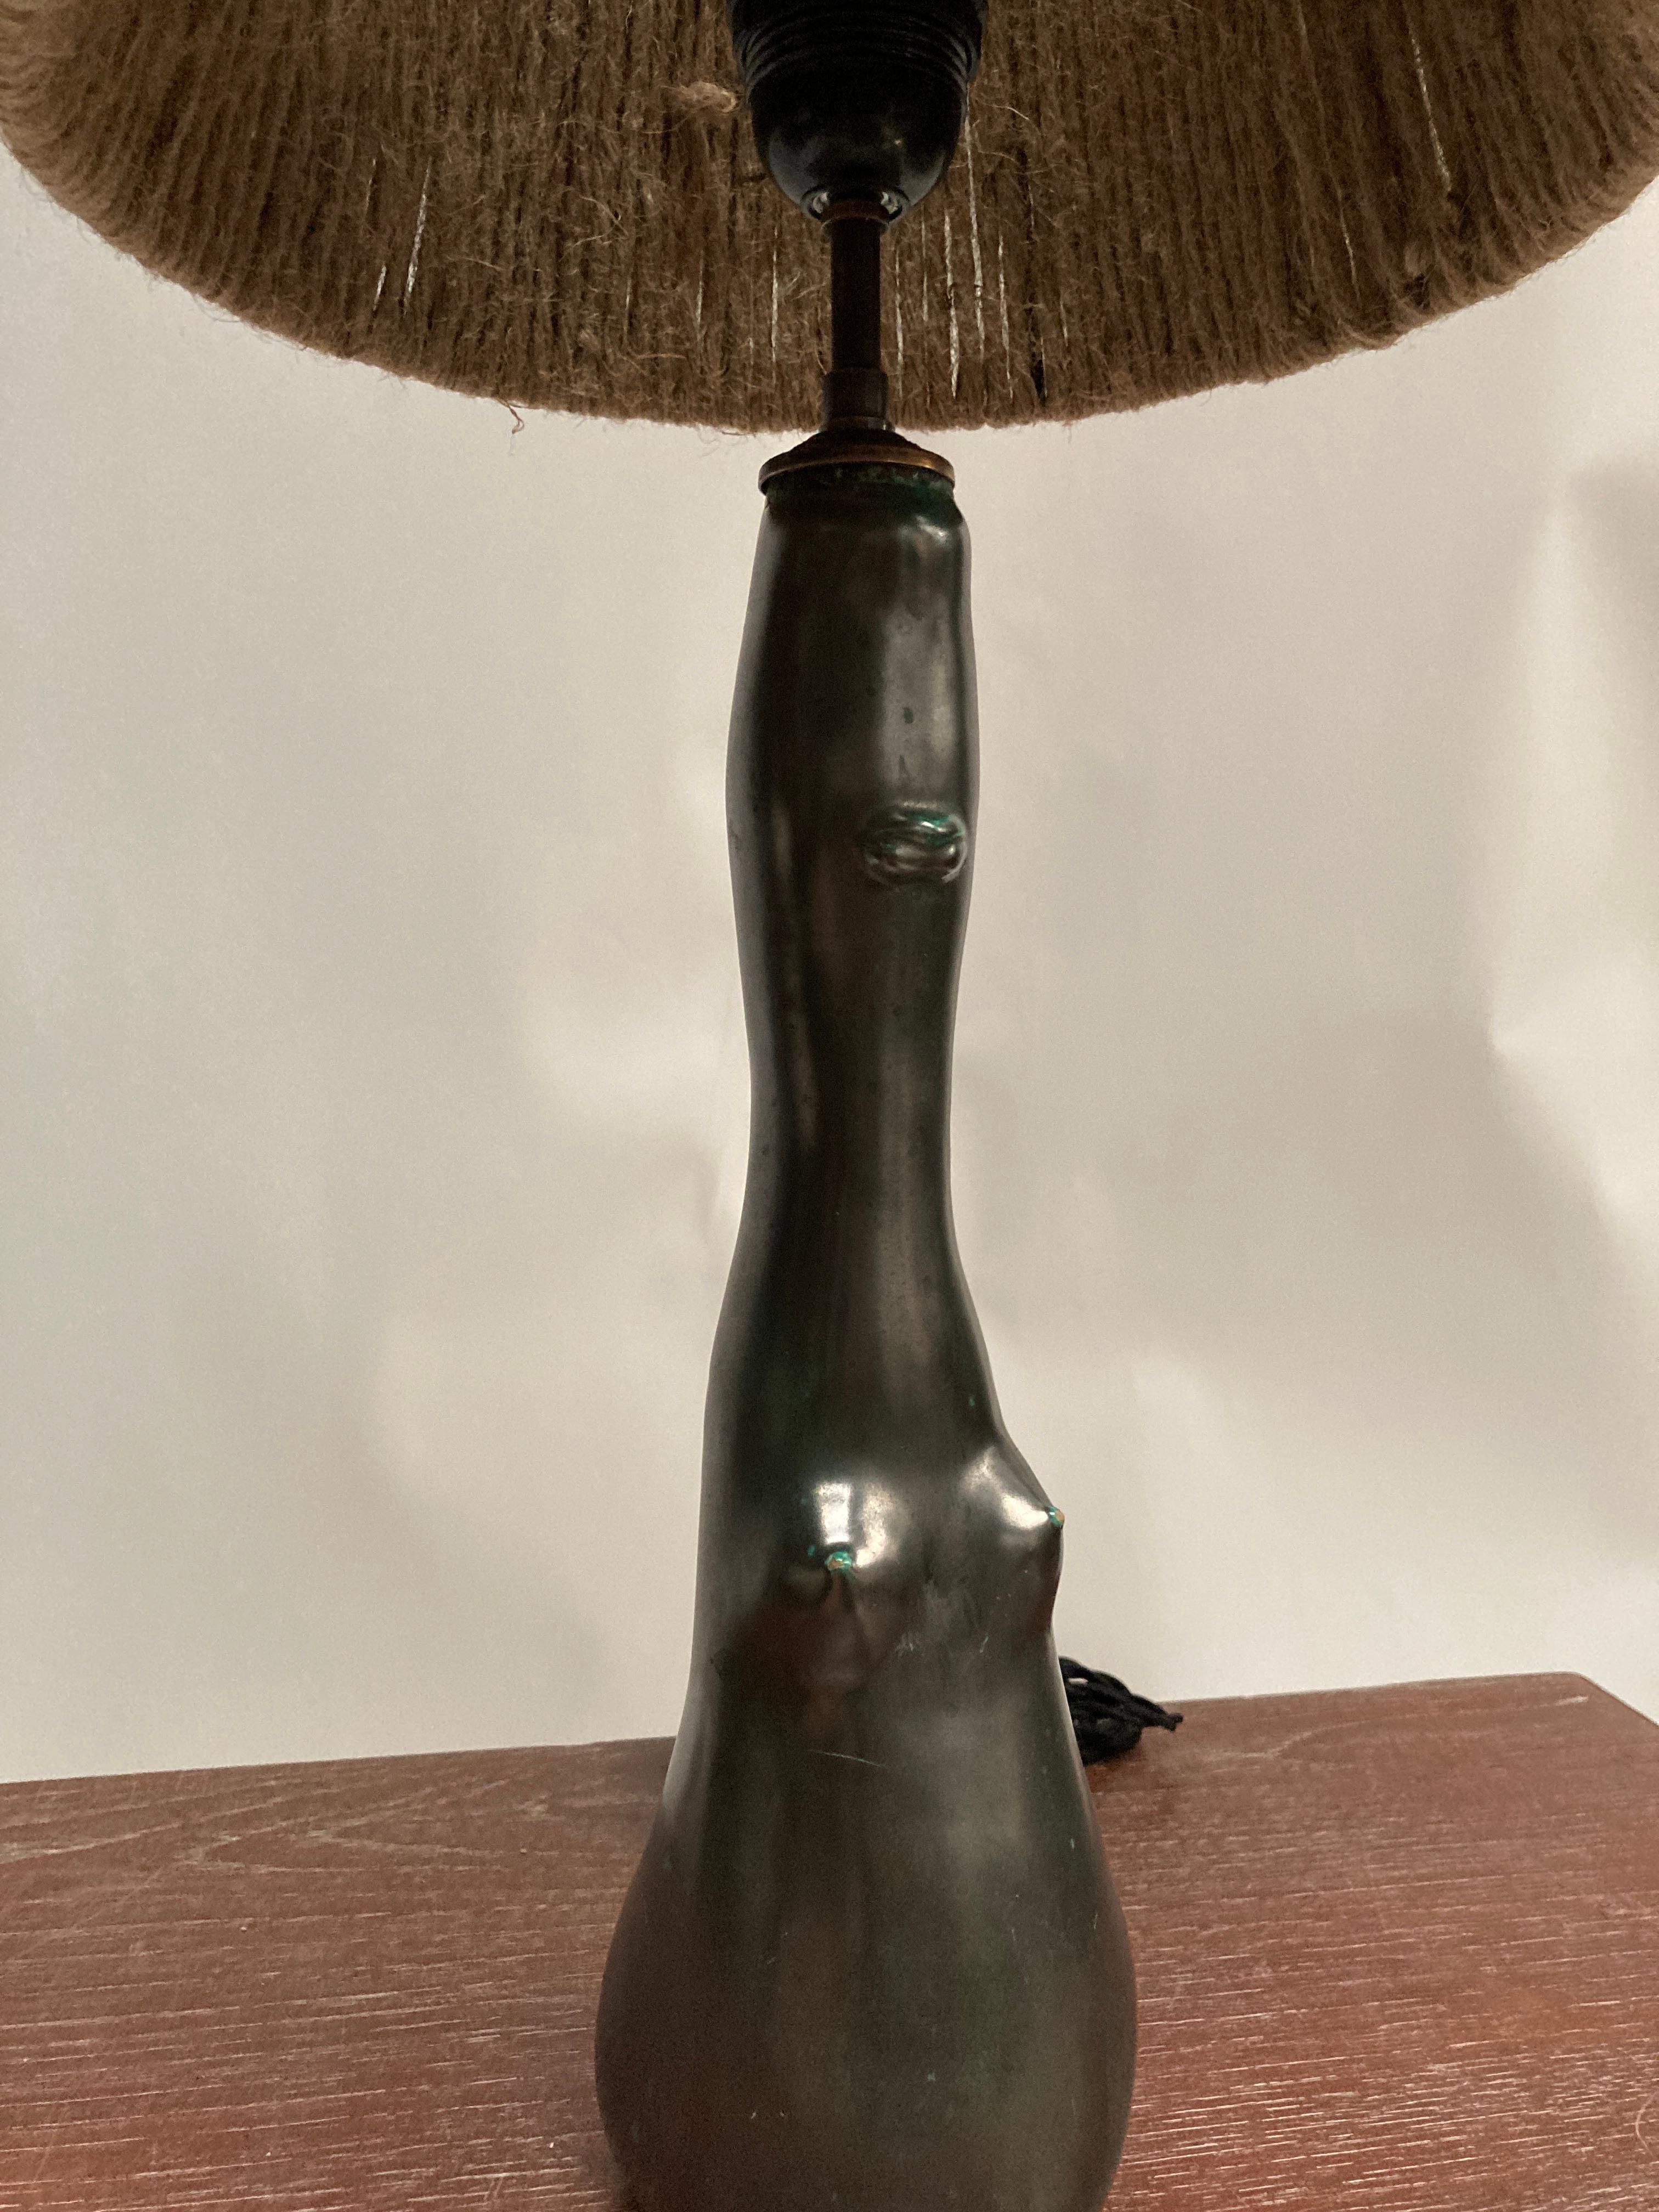 Very nice Studio pottery ceramic lamp
Showing a woman 
Dimension given without shade
No shade included